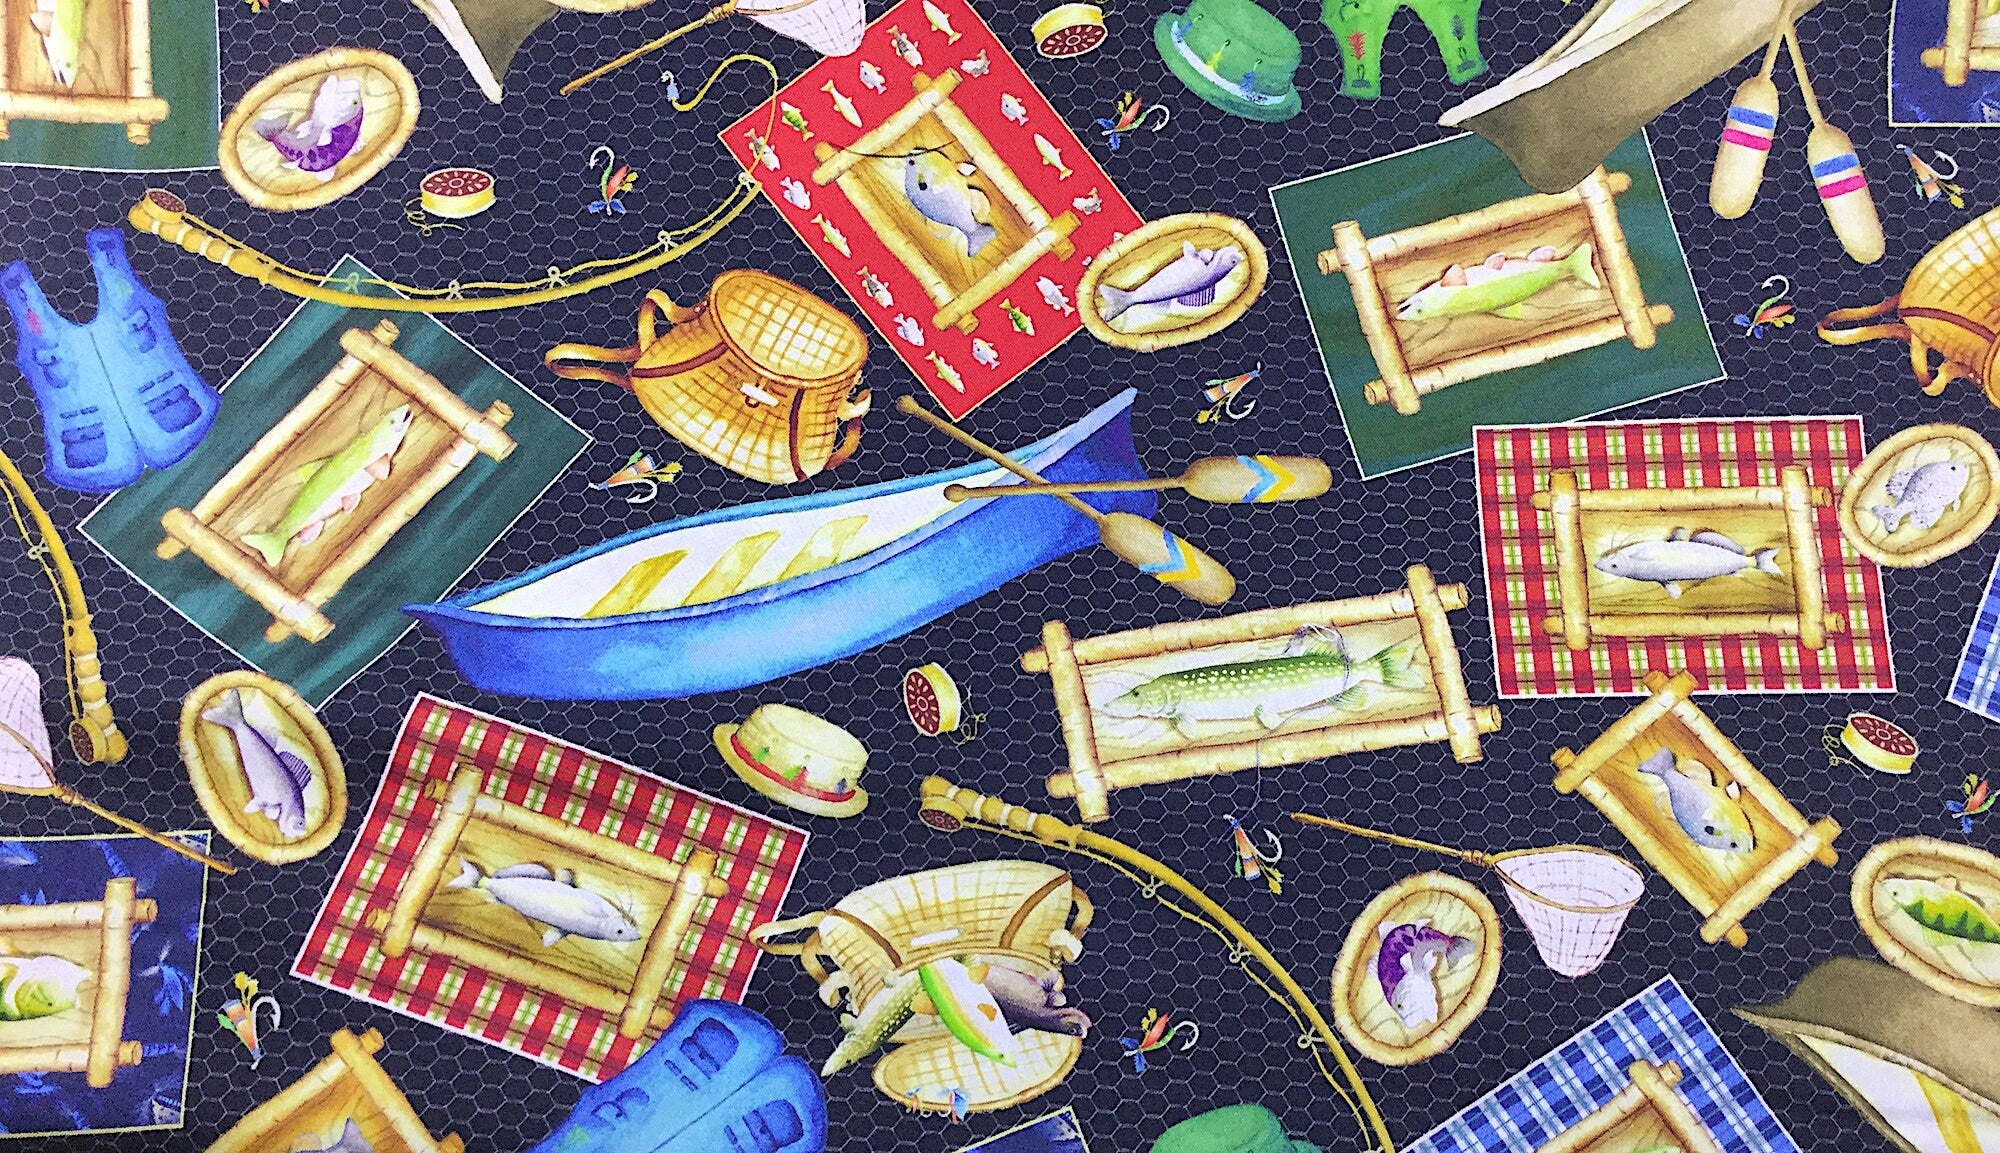 This fabric is part of the Keep it Reel Collection and is covered with trout canoes, fisherman's hats, oars, life vests and more fishing themed items.